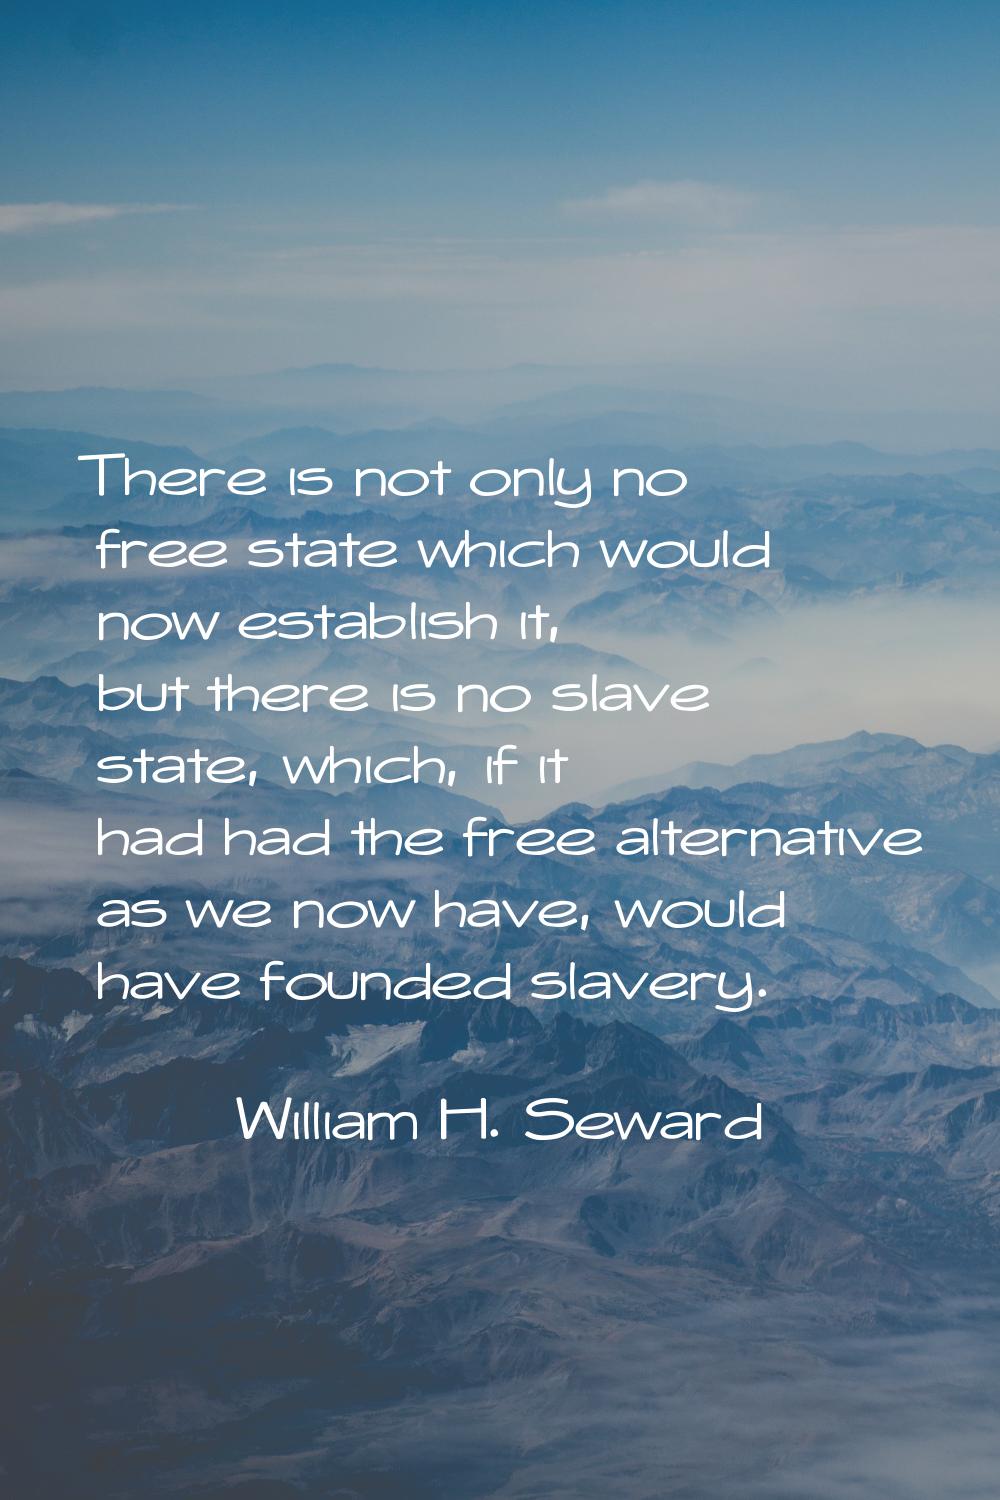 There is not only no free state which would now establish it, but there is no slave state, which, i